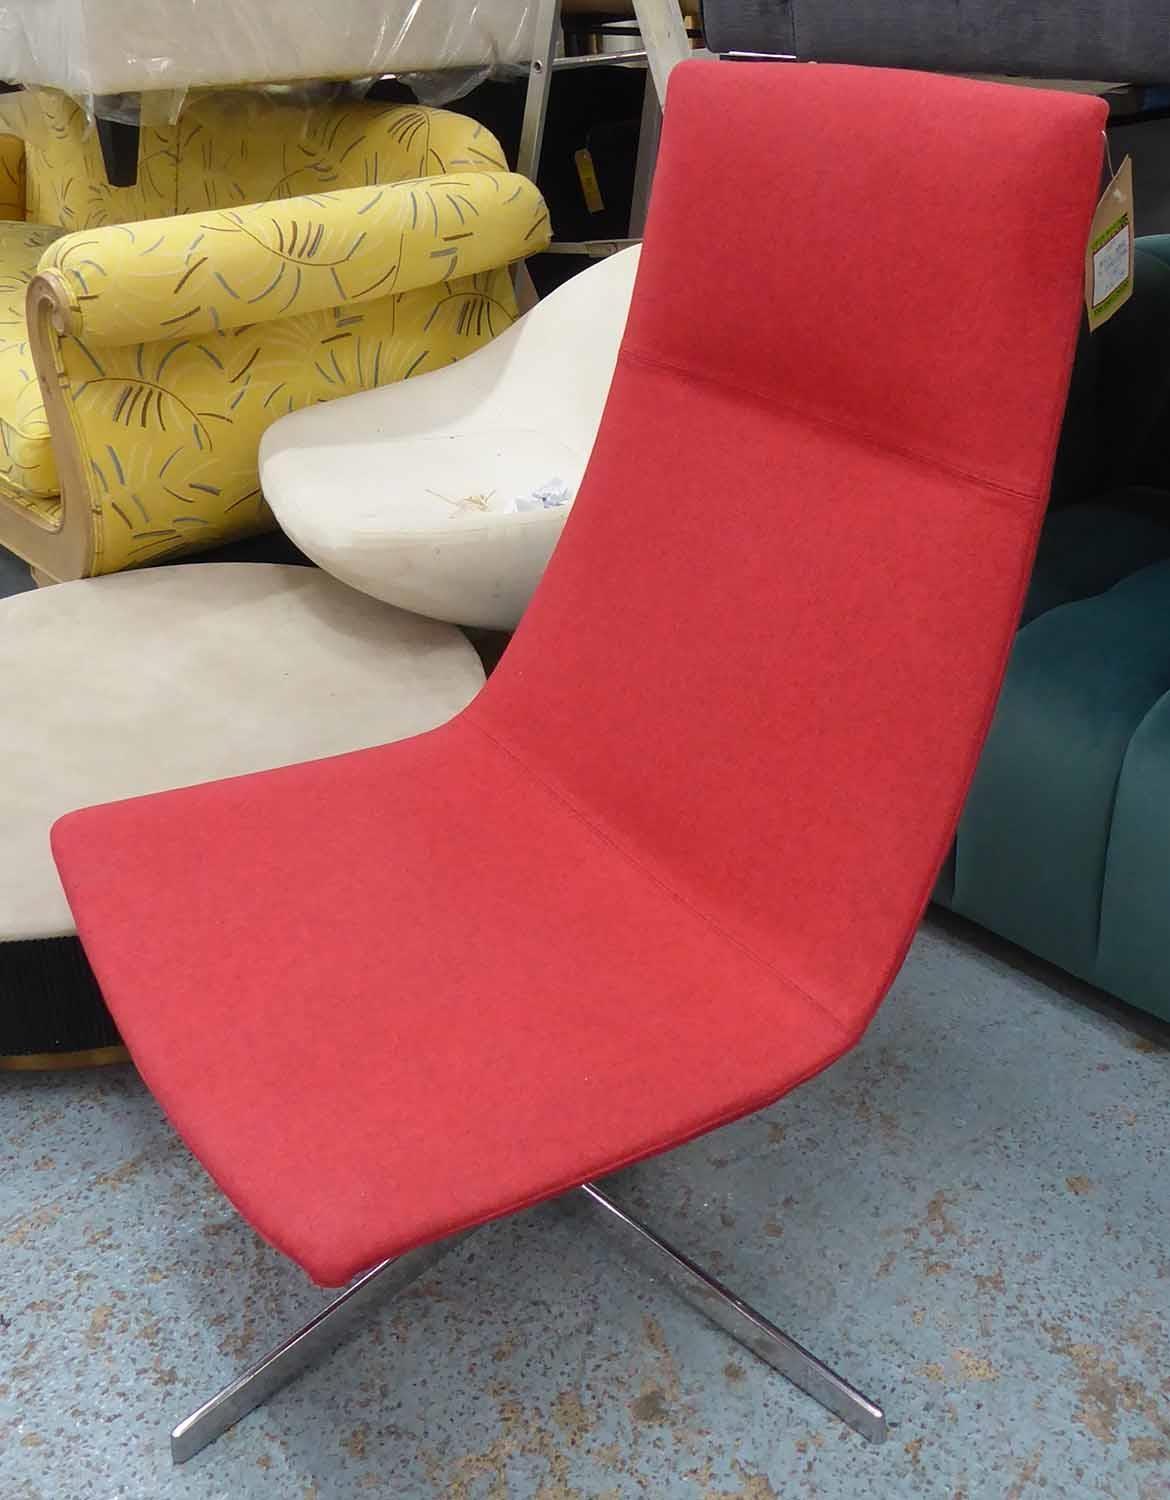 ARPER CATIFA 70 LOUNGE CHAIR, by Alberto Lievore, Jeannette Altherr and Manuel Molina, red finish,